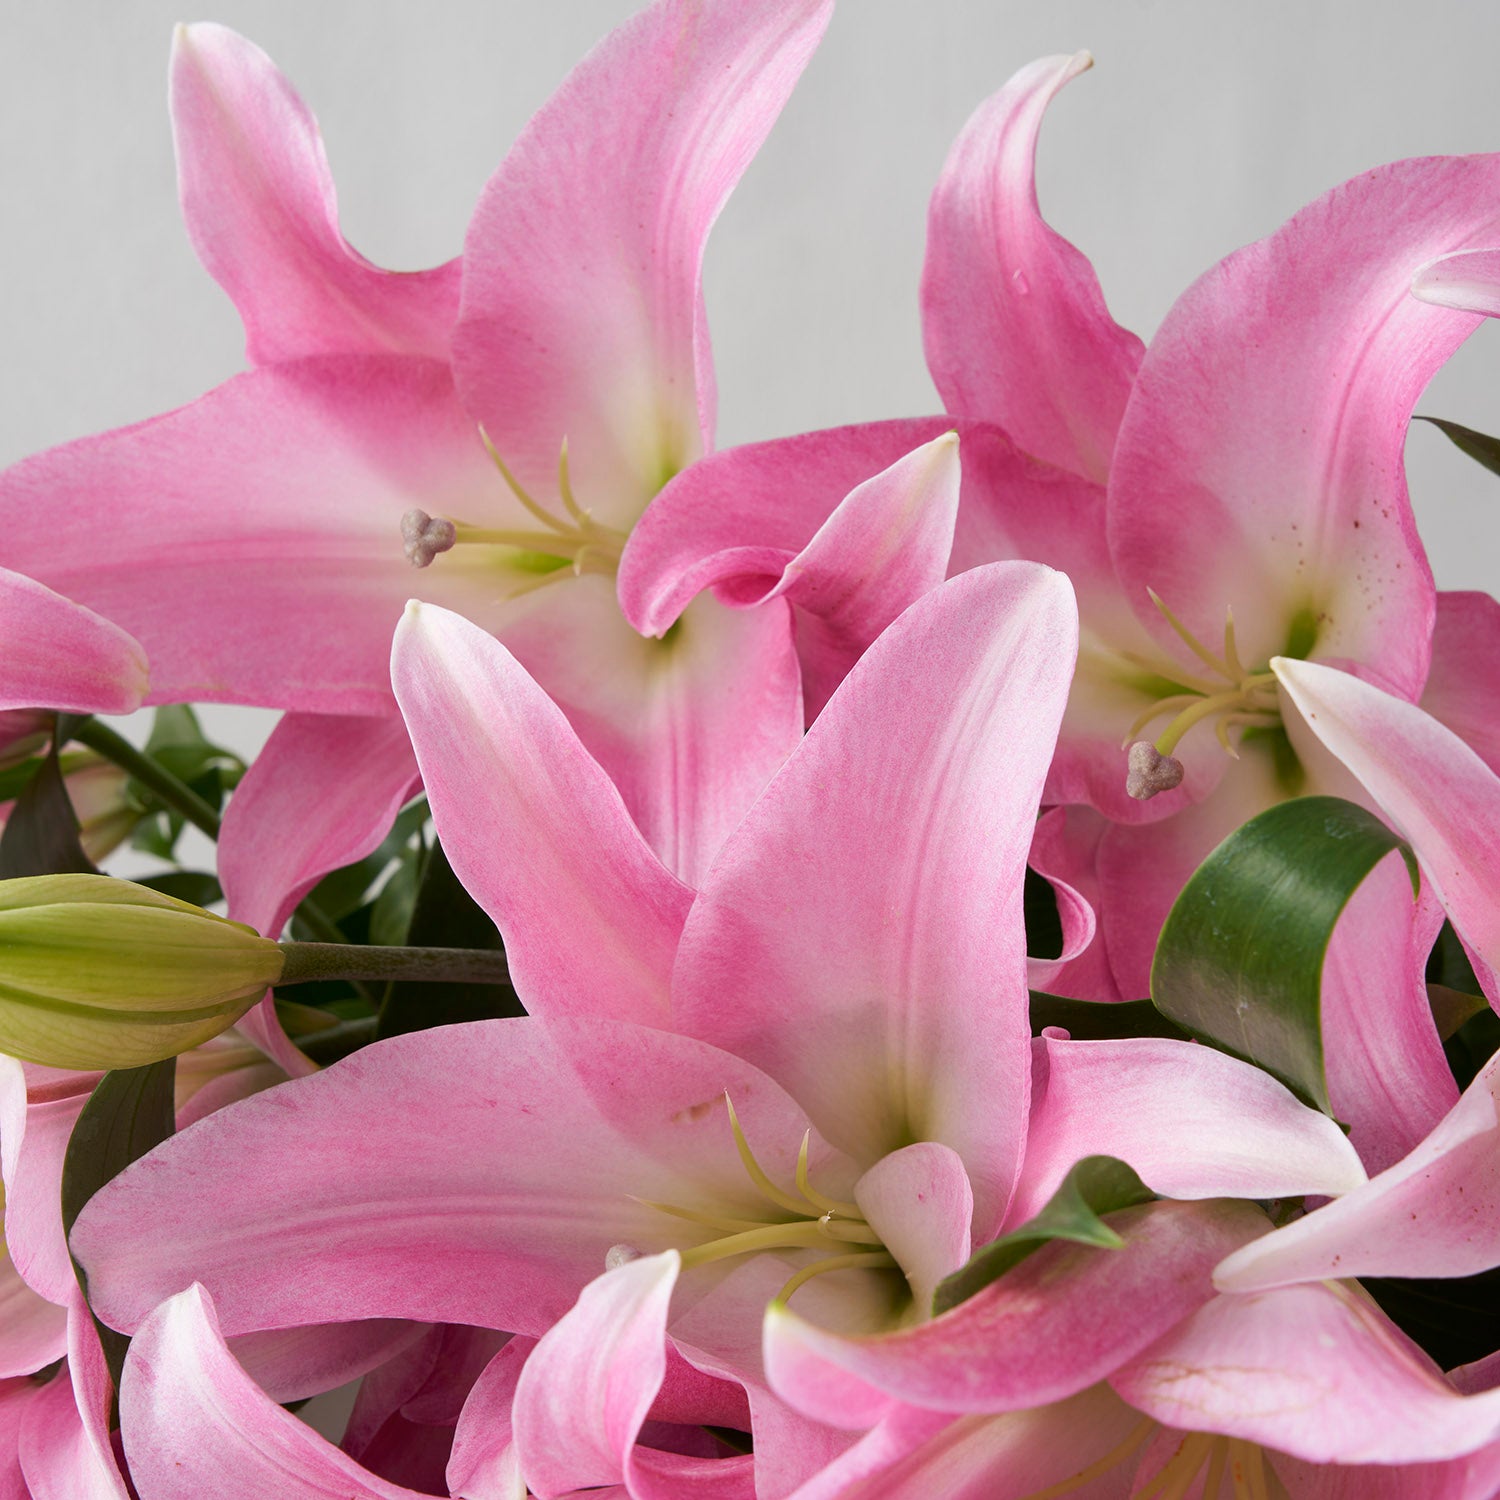 Closeup of pink lily flowers.